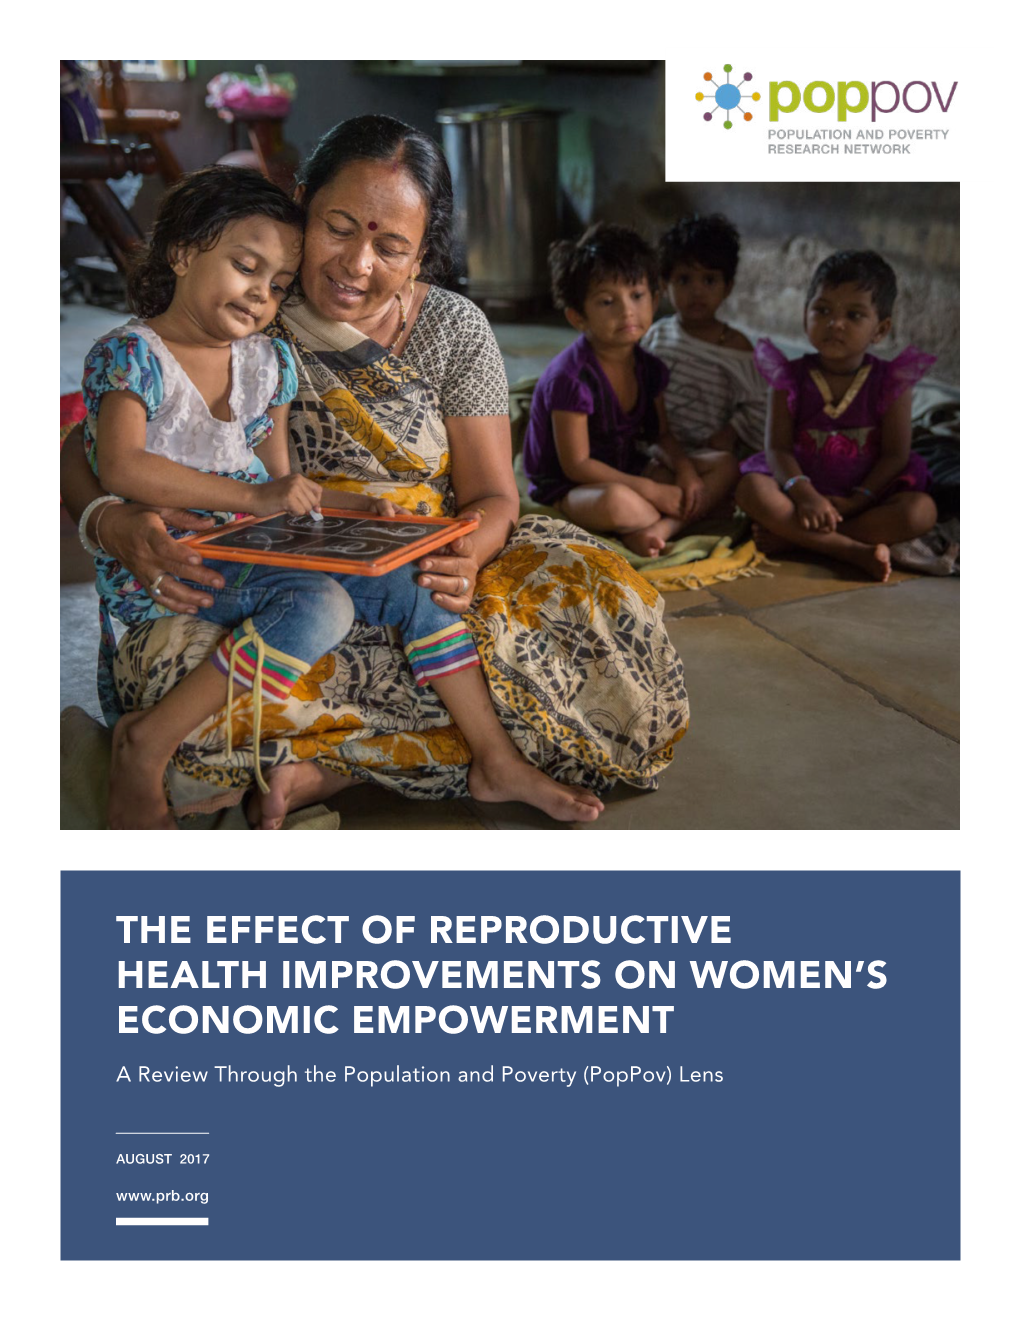 The Effect of Reproductive Health Improvements on Women's